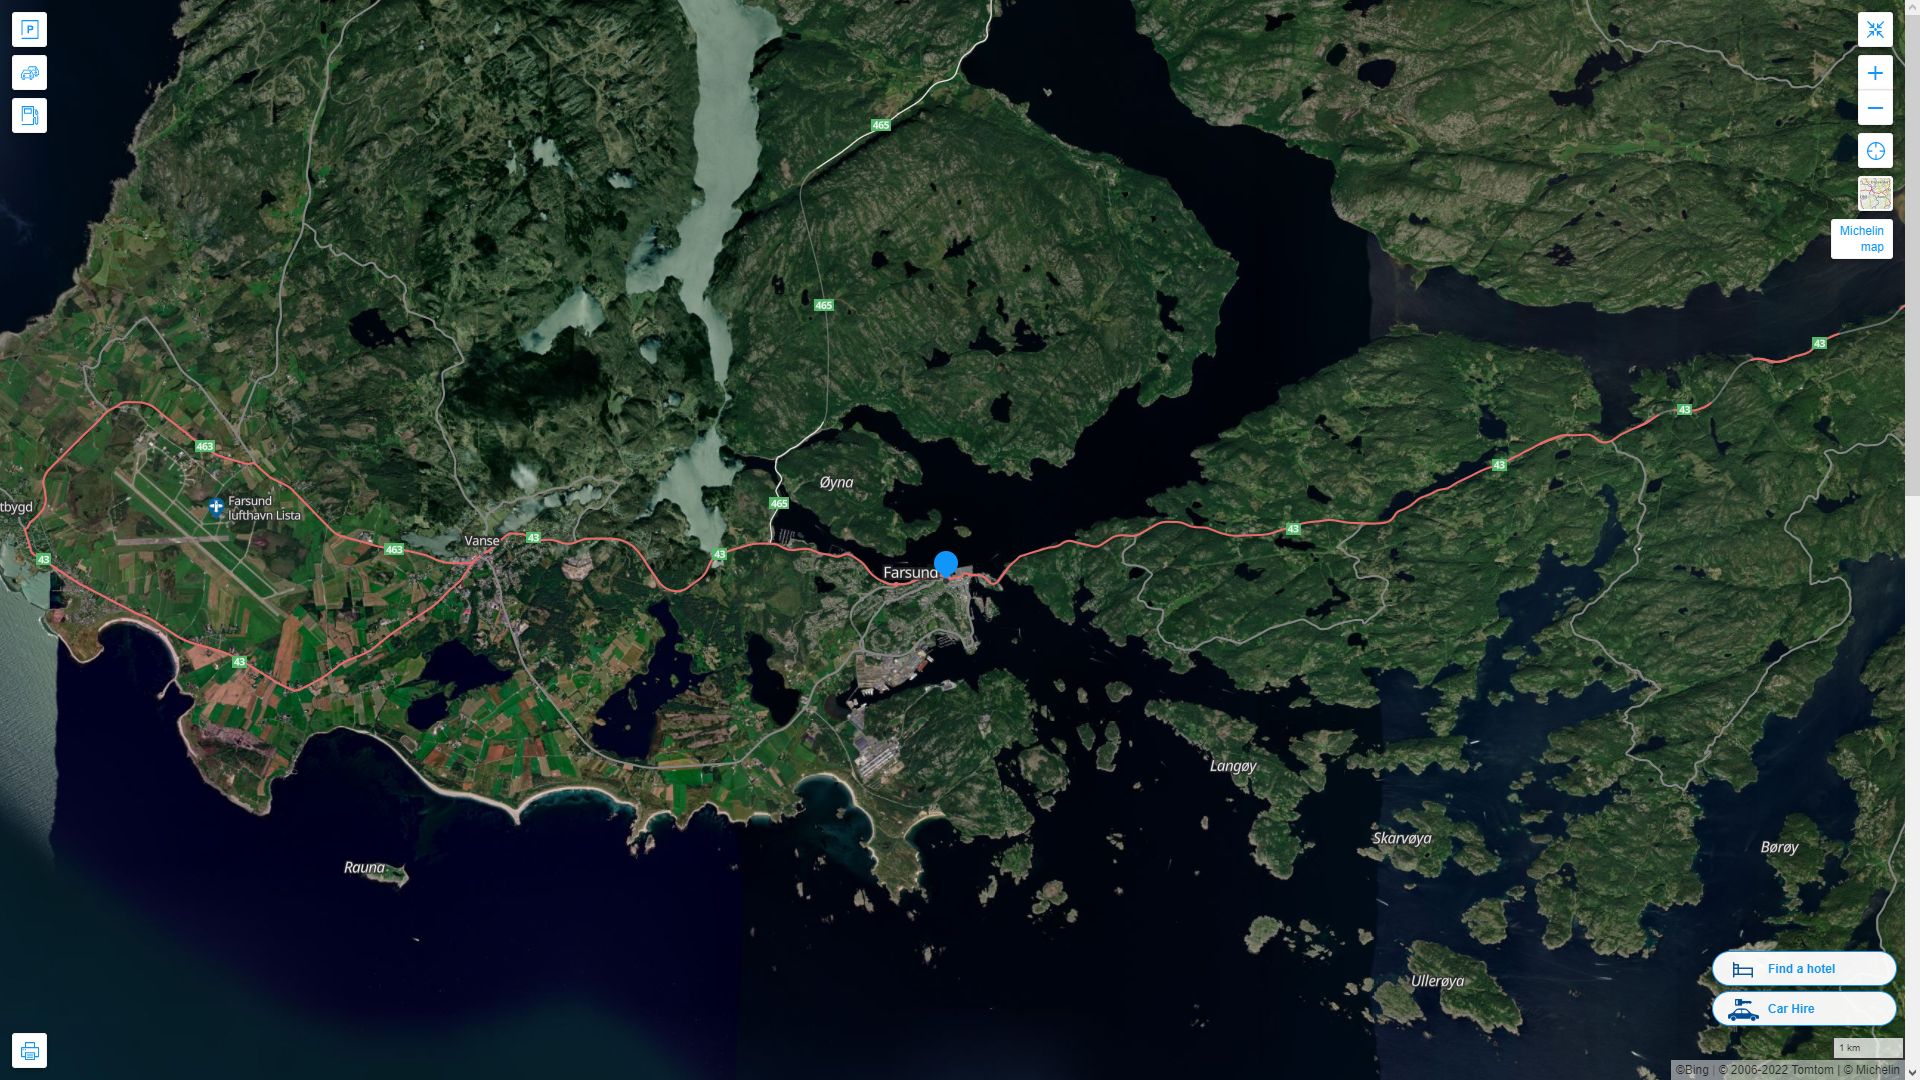 Farsund Highway and Road Map with Satellite View